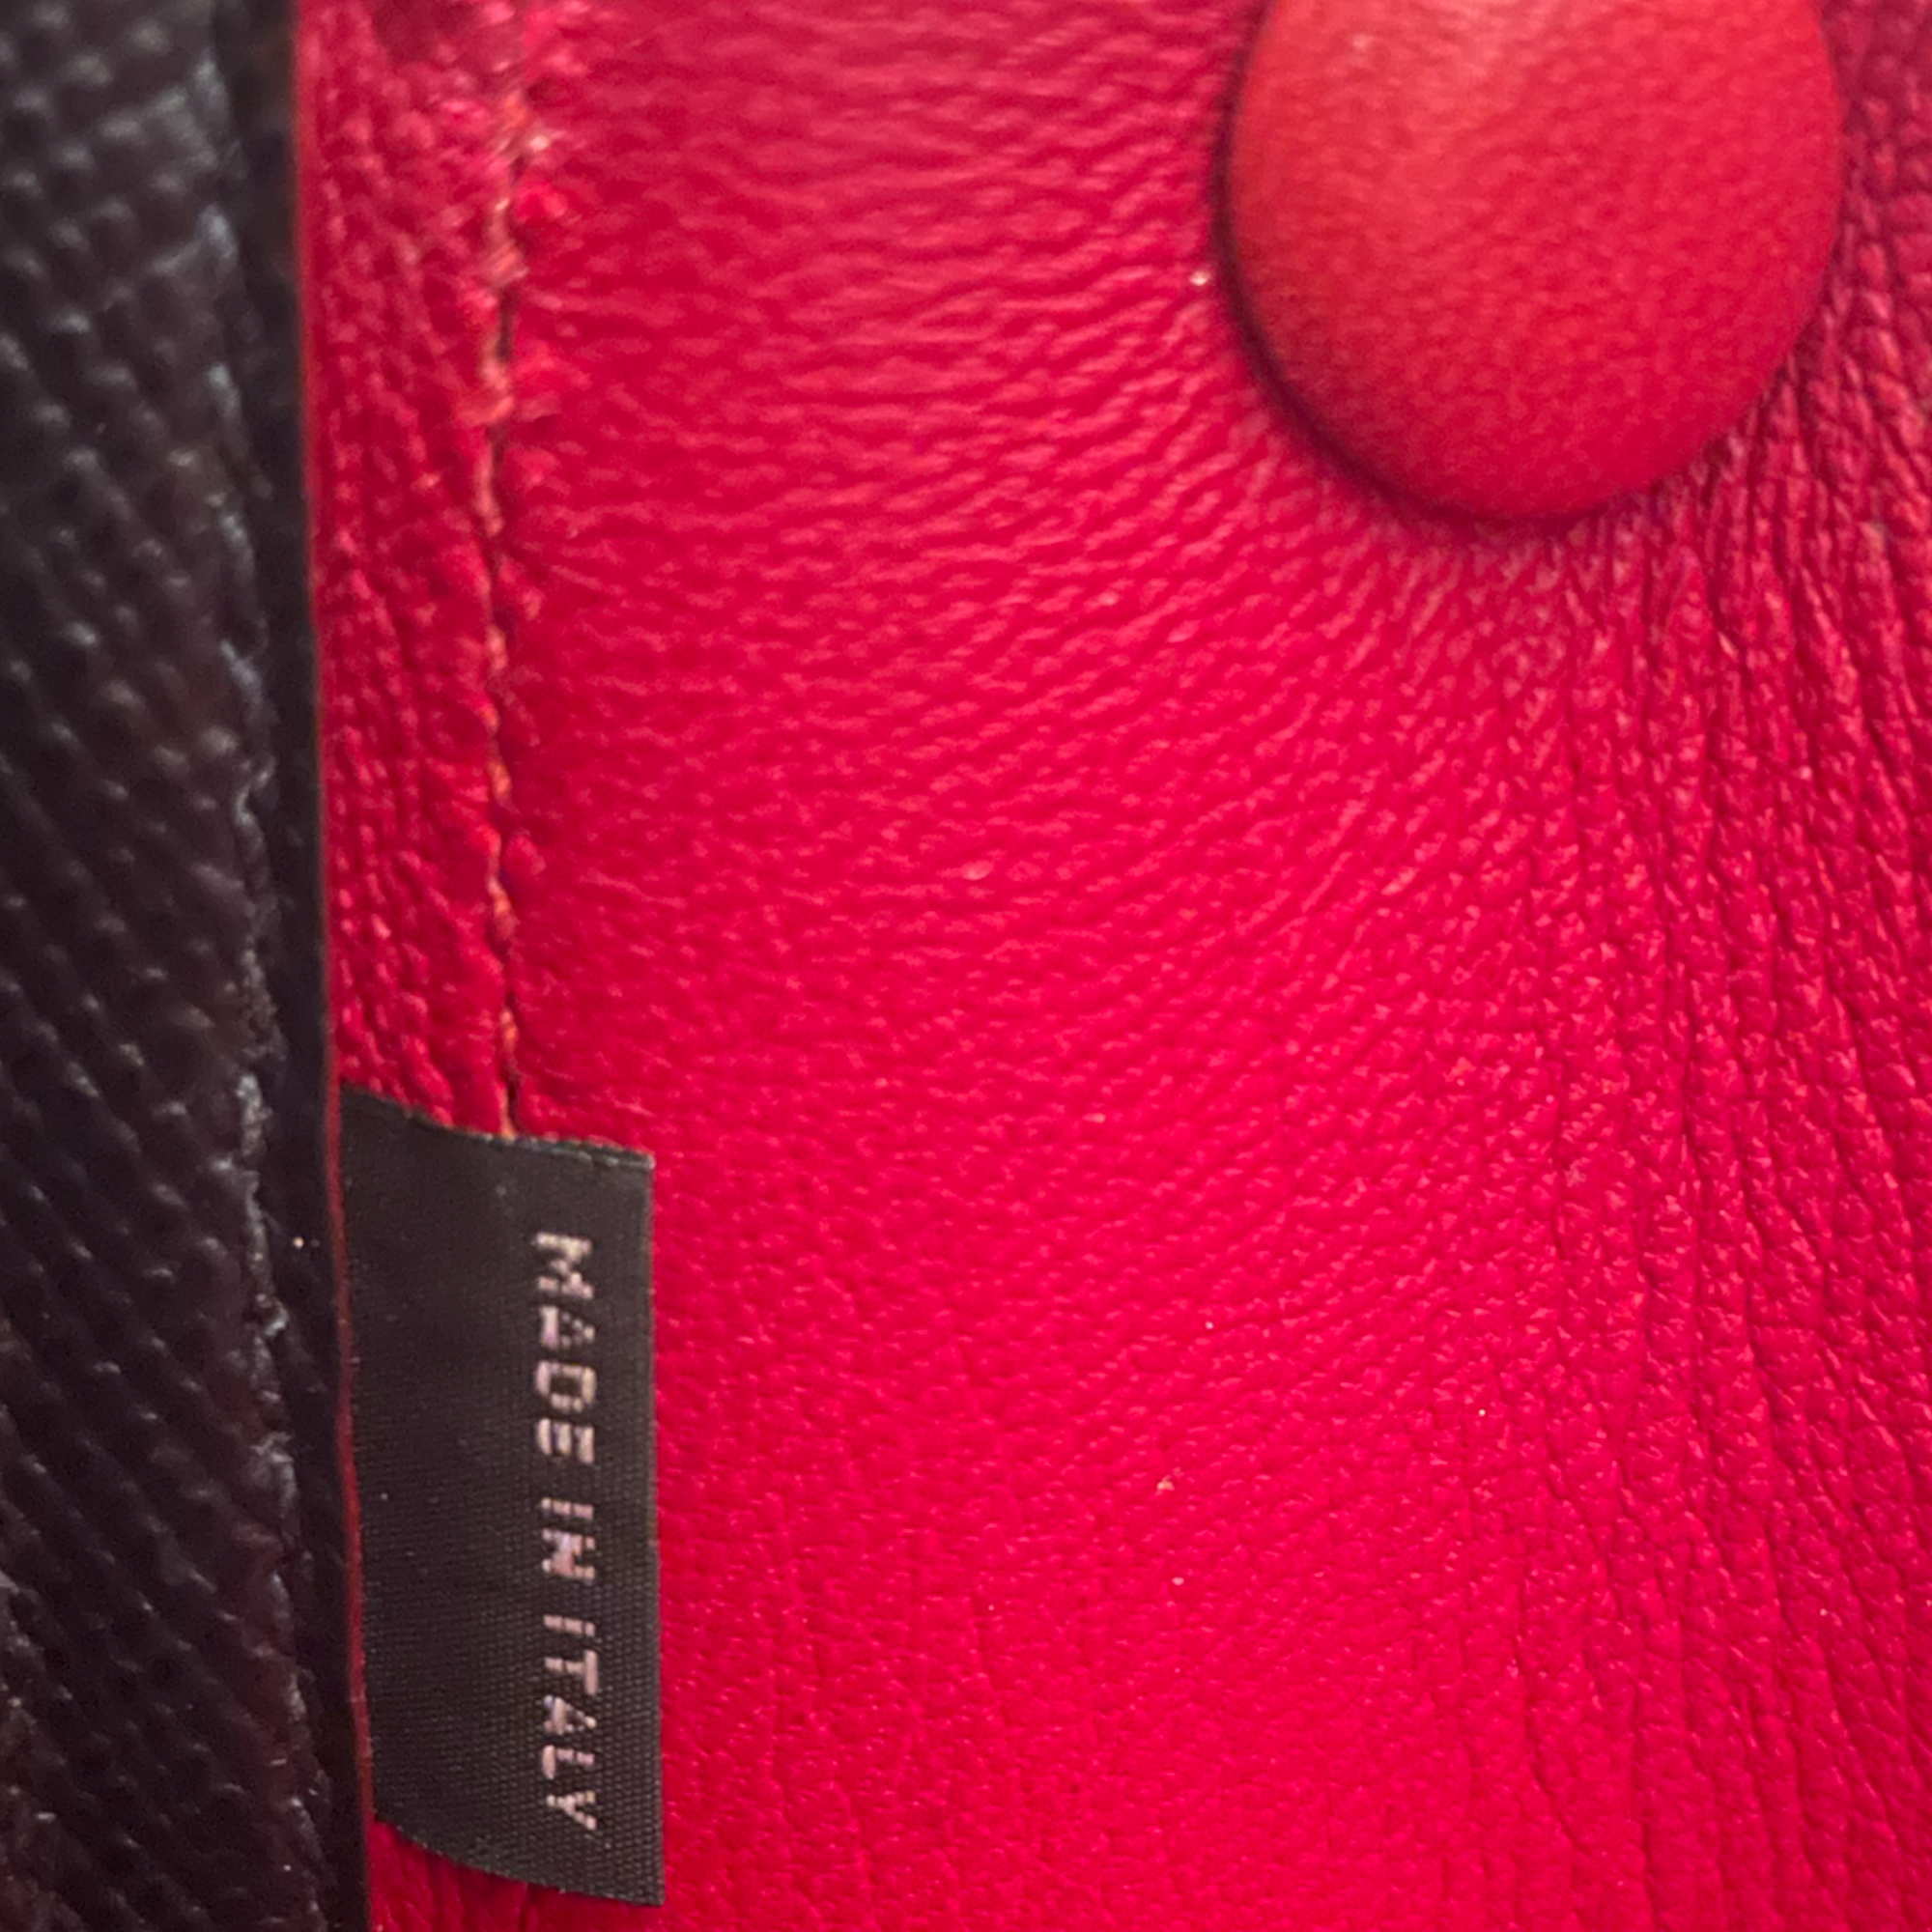 Black Fiery Red Saffiano Leather Double Prada Bag (SOLD OUT IN STORES)